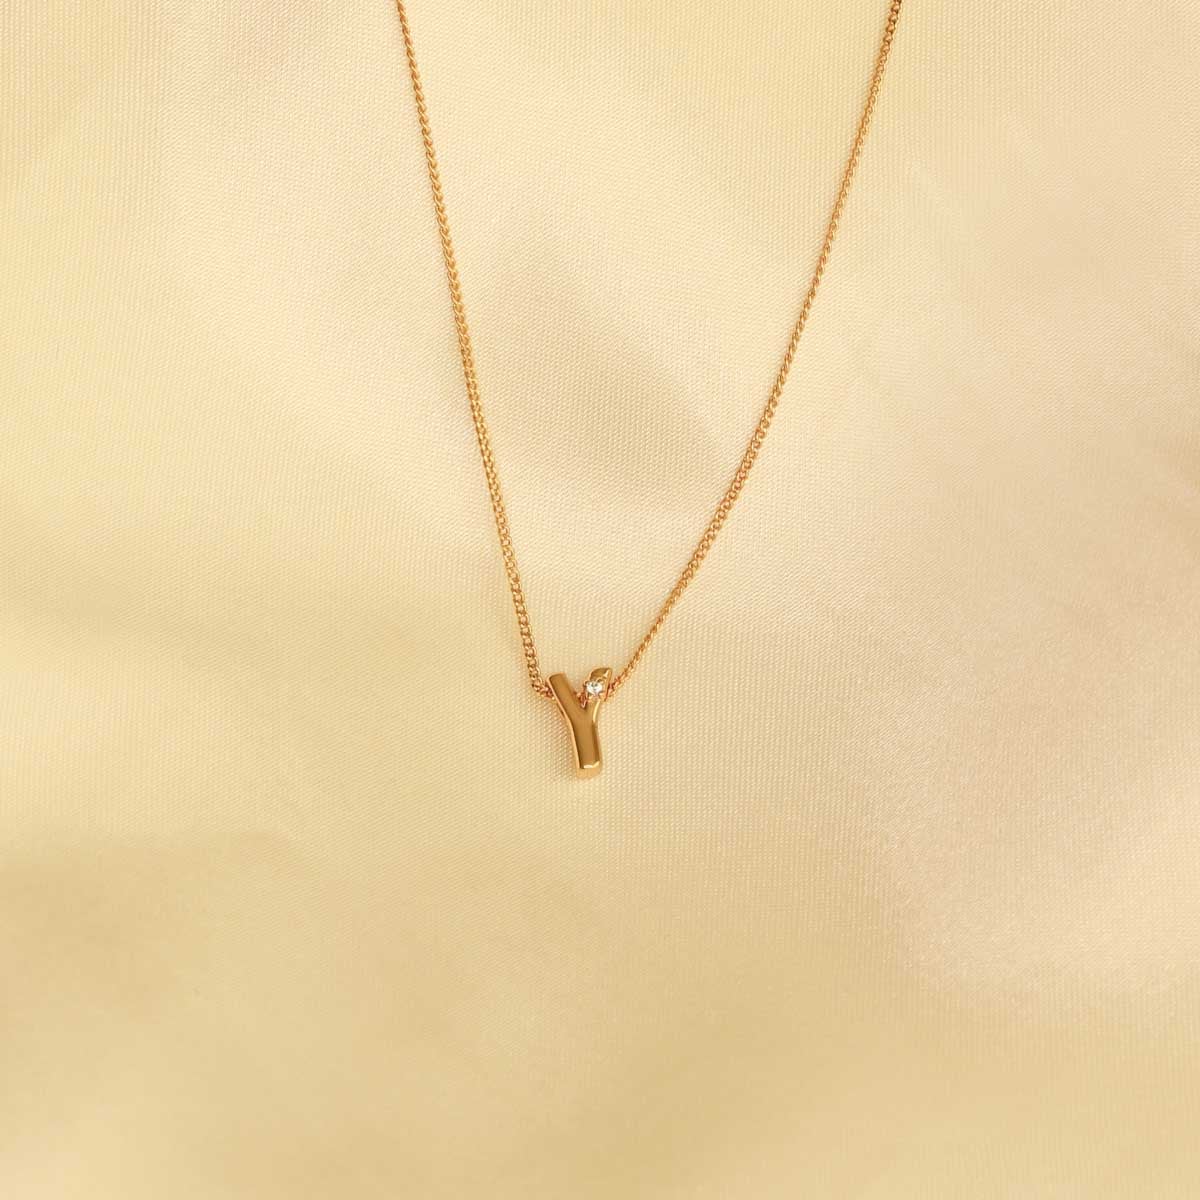 Flat lay shot of Y Initial Pendant Necklace in Gold